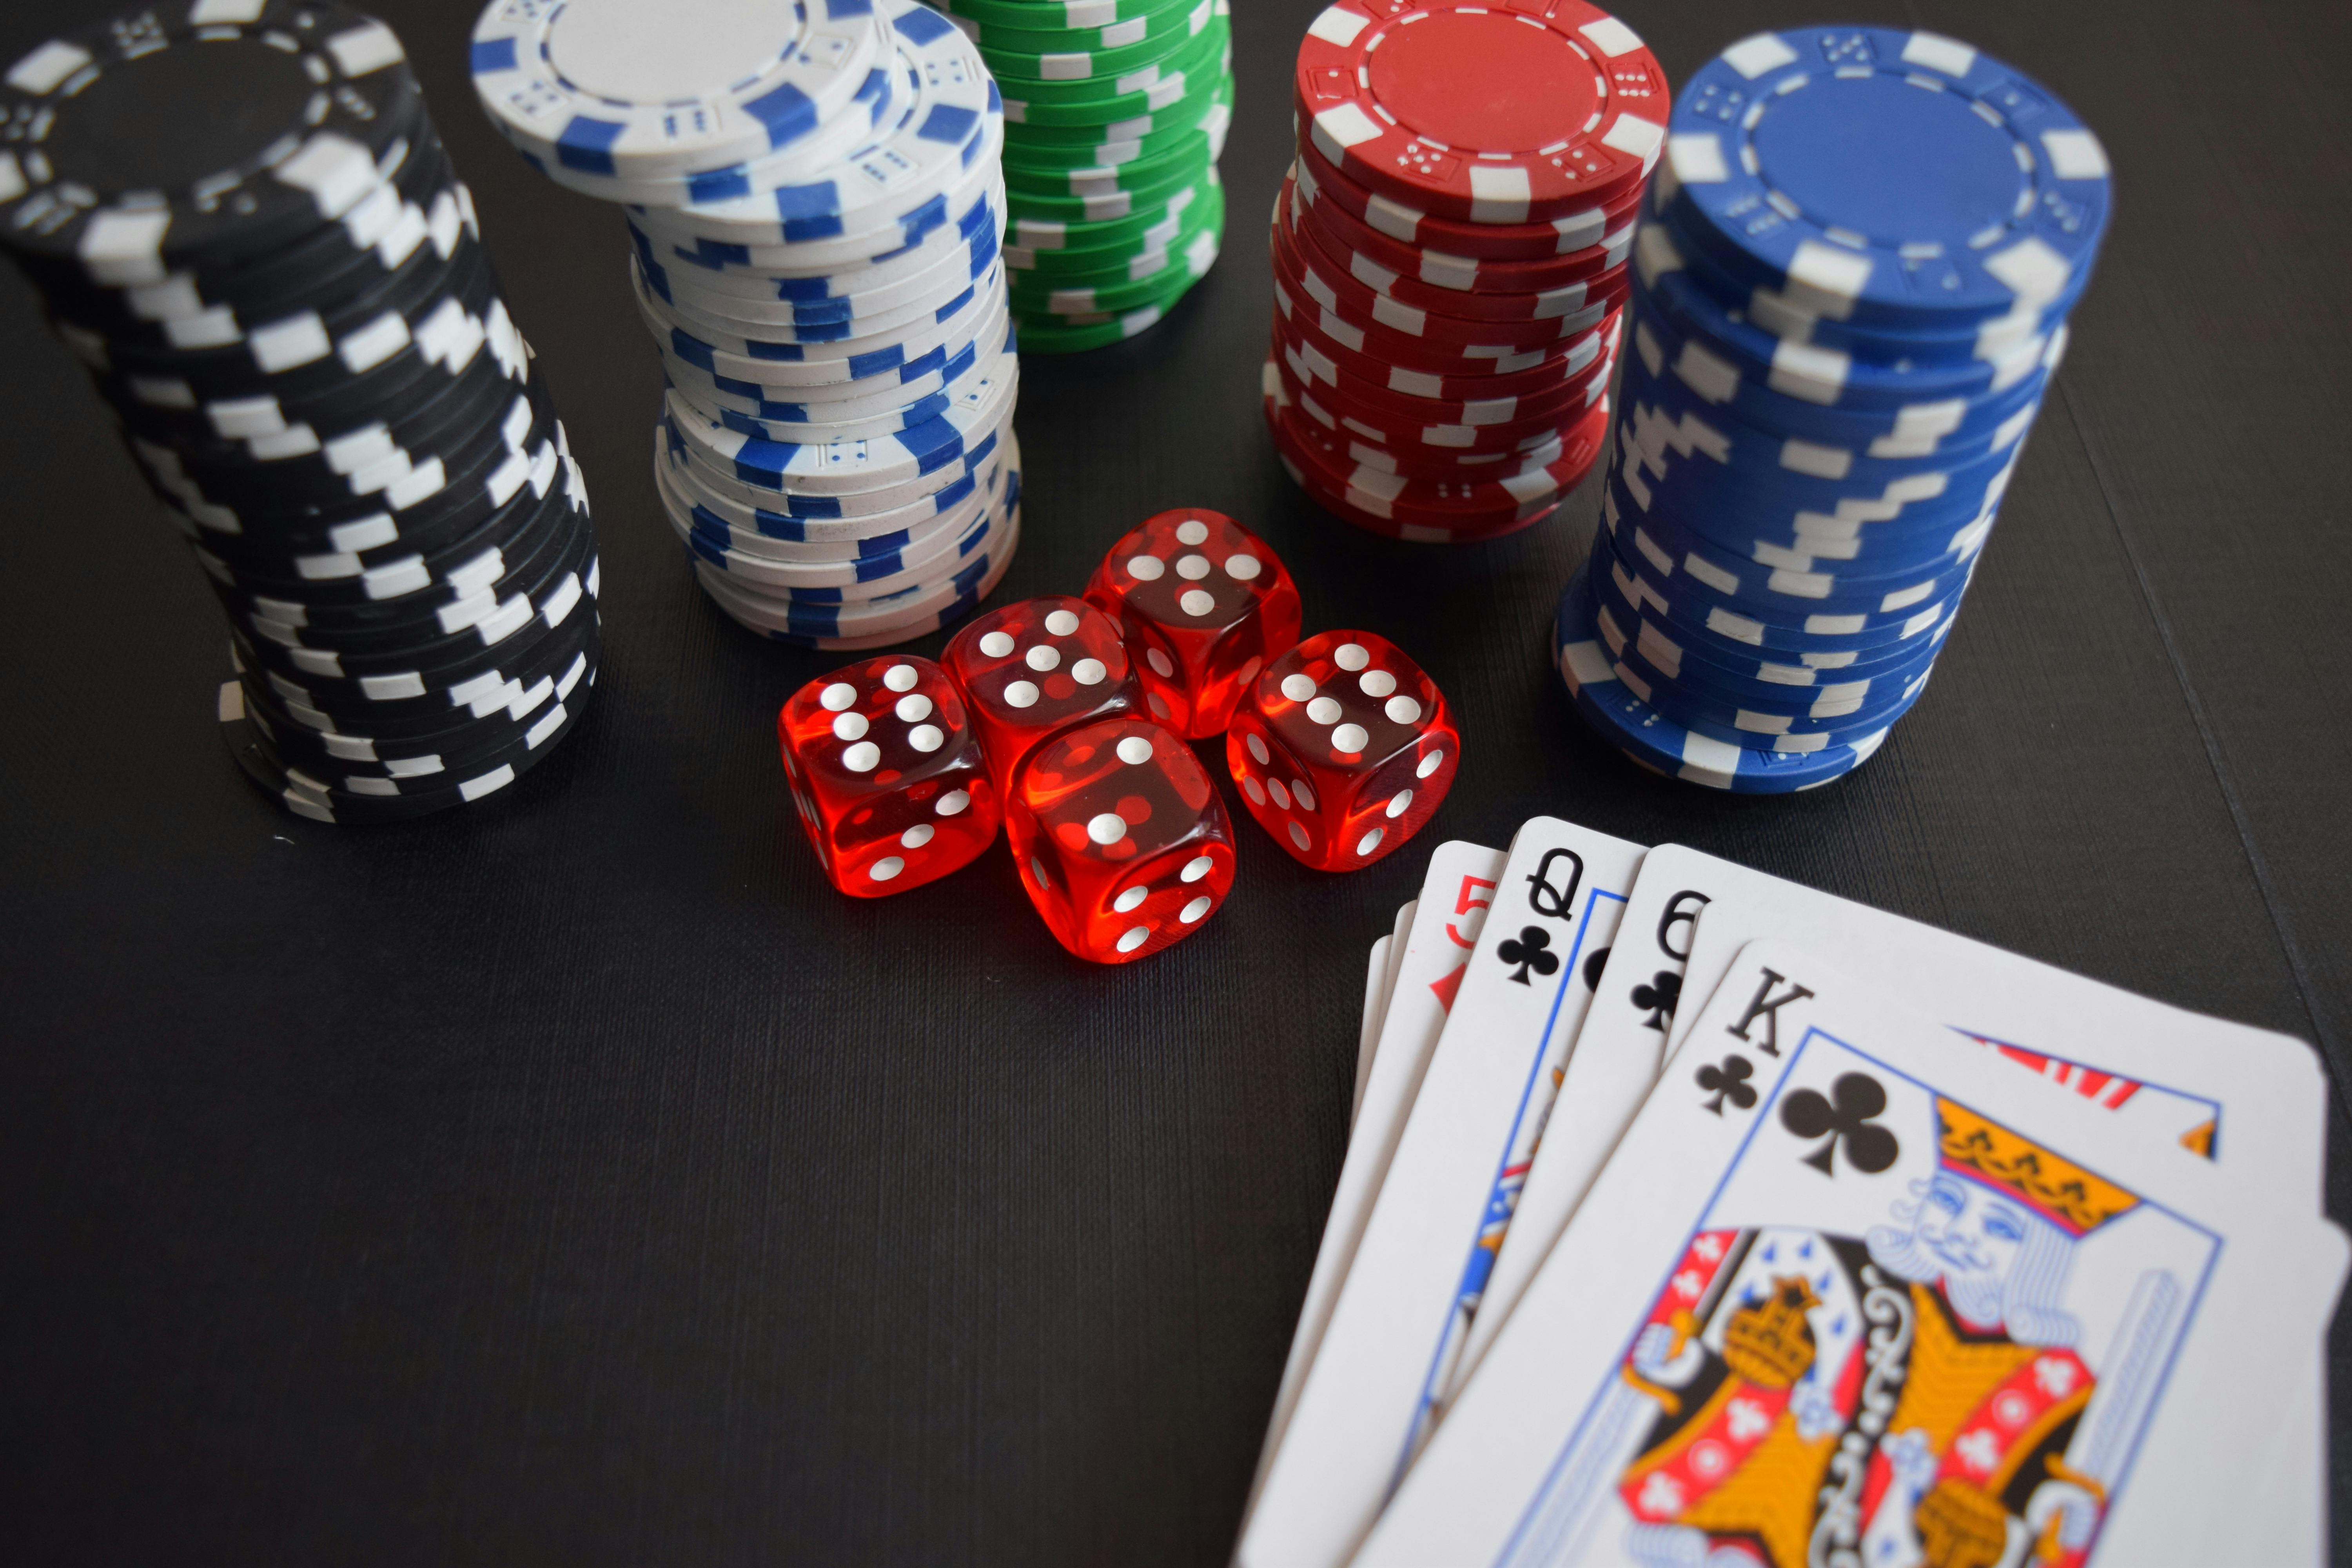 5 Reasons Why You Should Play at MMC996 Online Casino Singapore